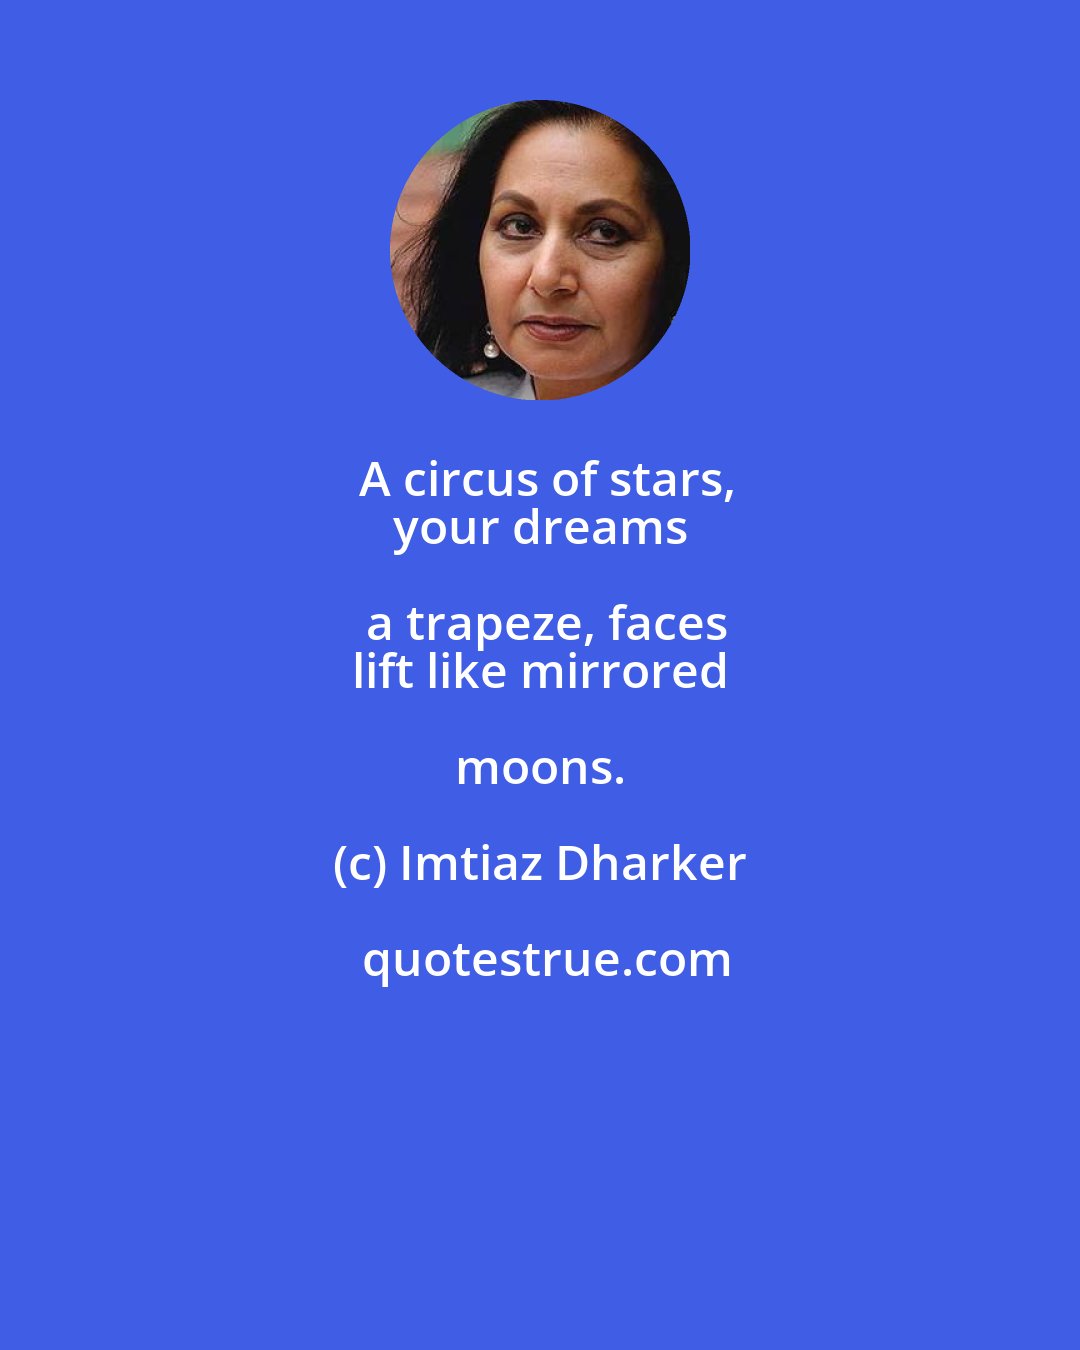 Imtiaz Dharker: A circus of stars,
 your dreams a trapeze, faces
 lift like mirrored moons.